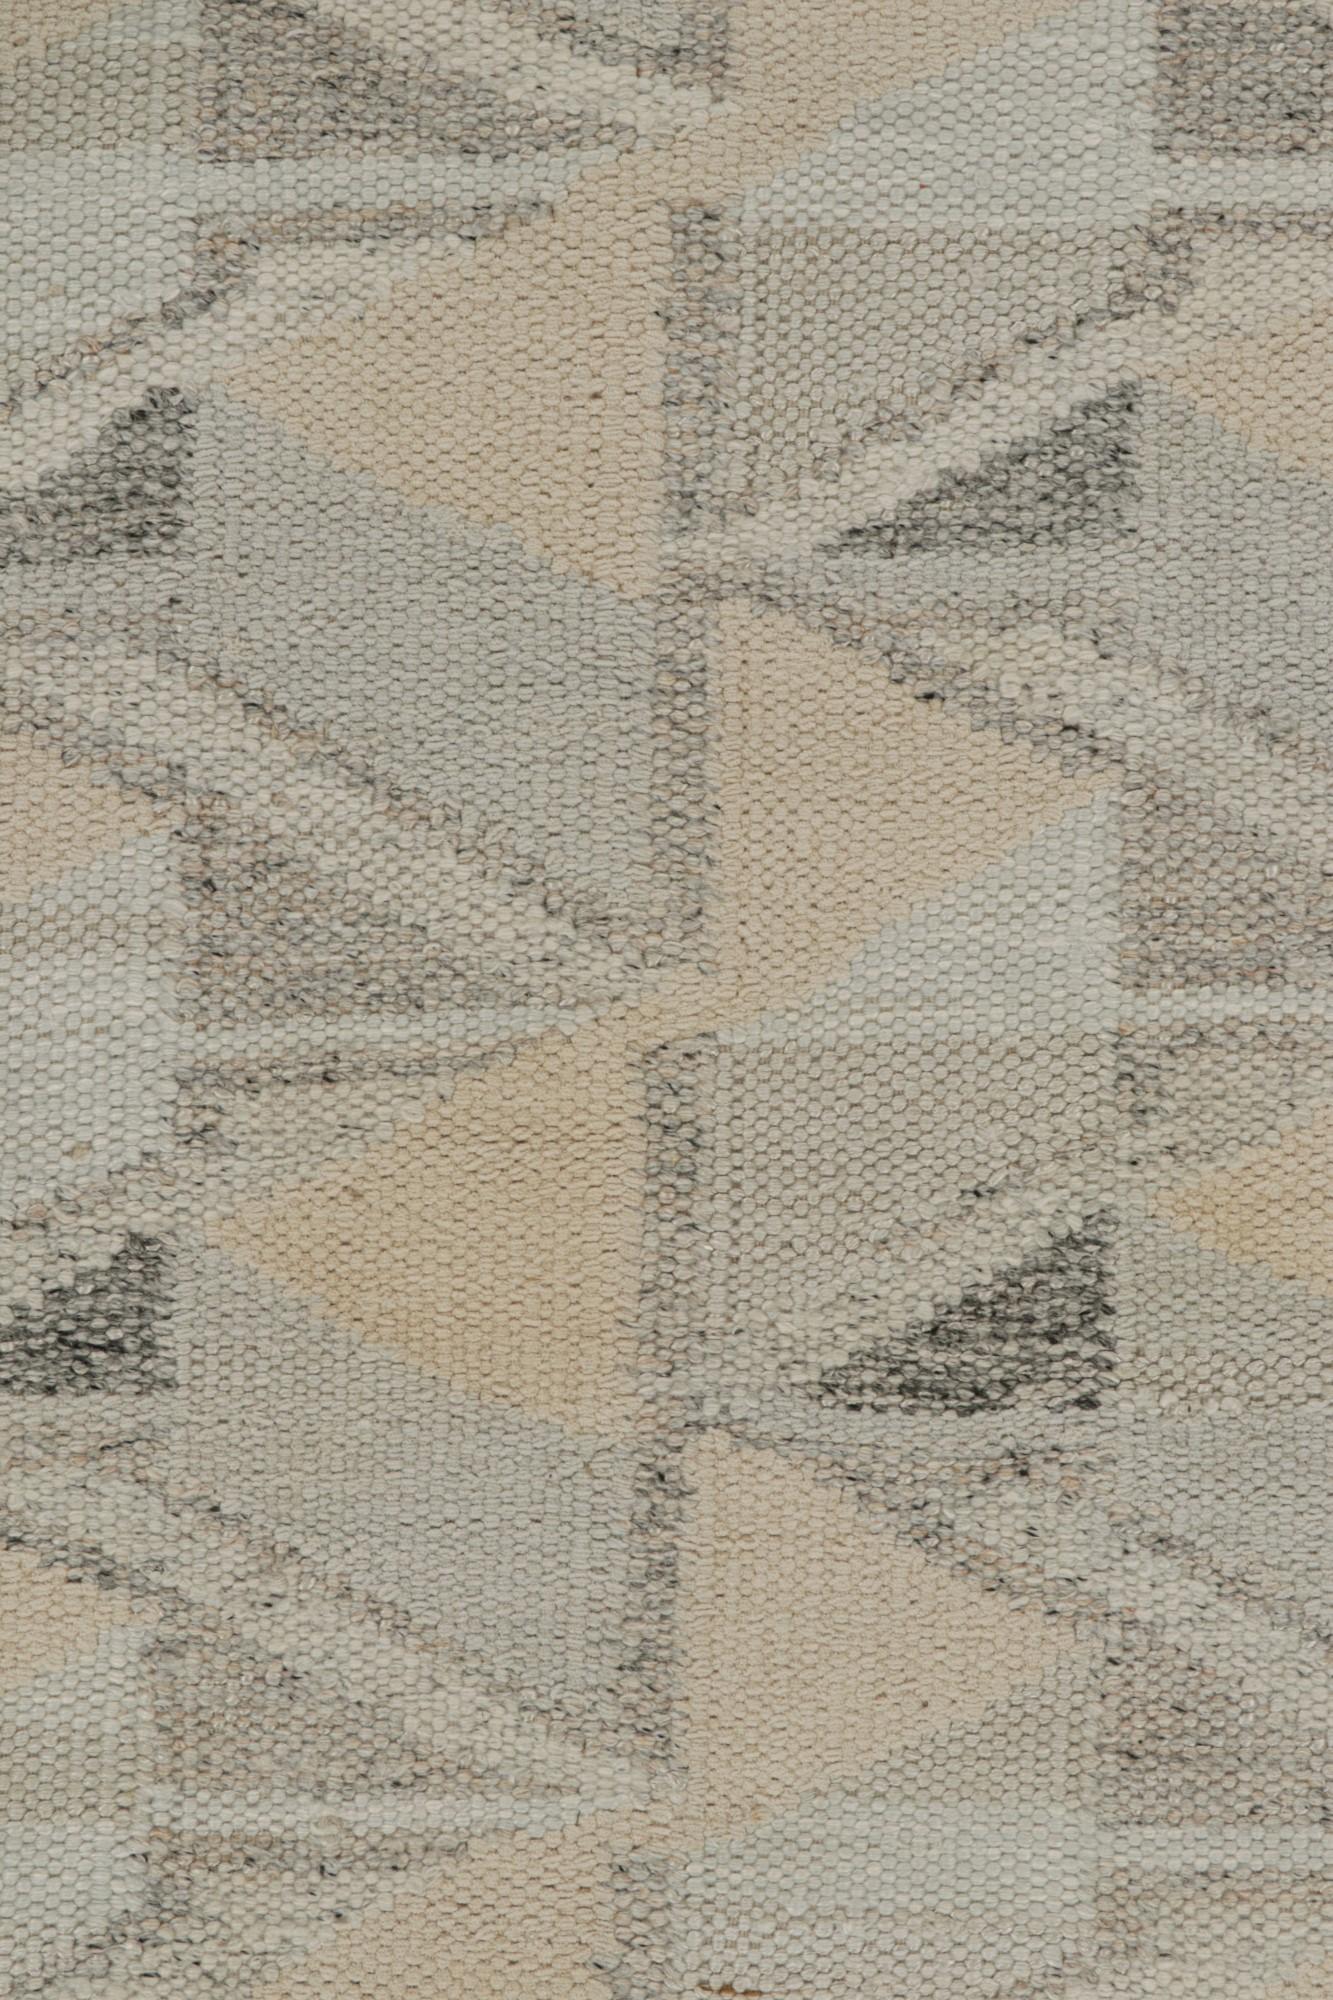 Rug & Kilim’s Scandinavian Kilim Style Runner Rug in Grey & Beige Patterns In New Condition For Sale In Long Island City, NY